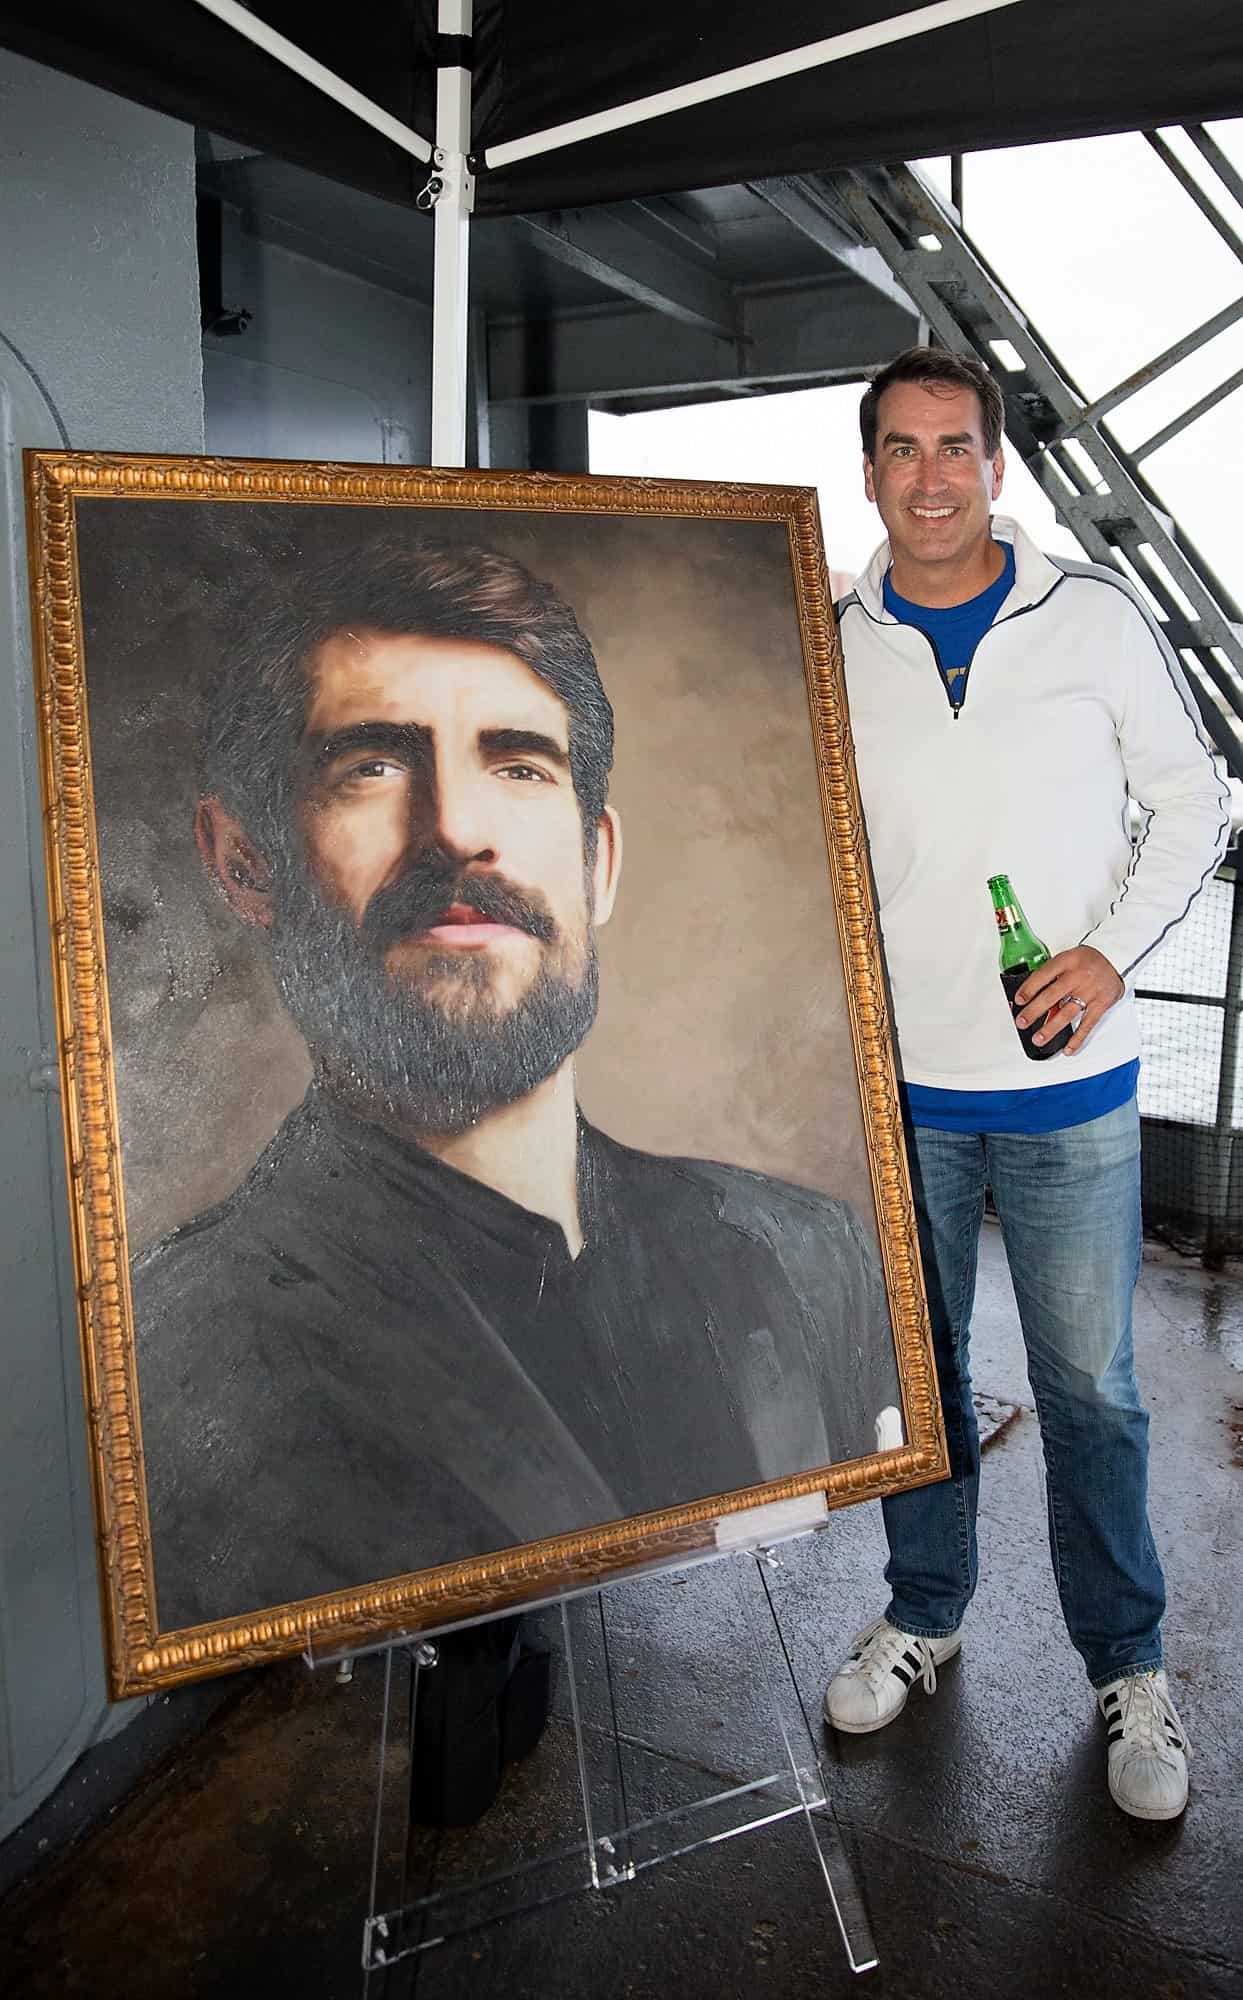 Dos Equis most famous man mural (left), Actor and Comedian Ron Riggle (right)